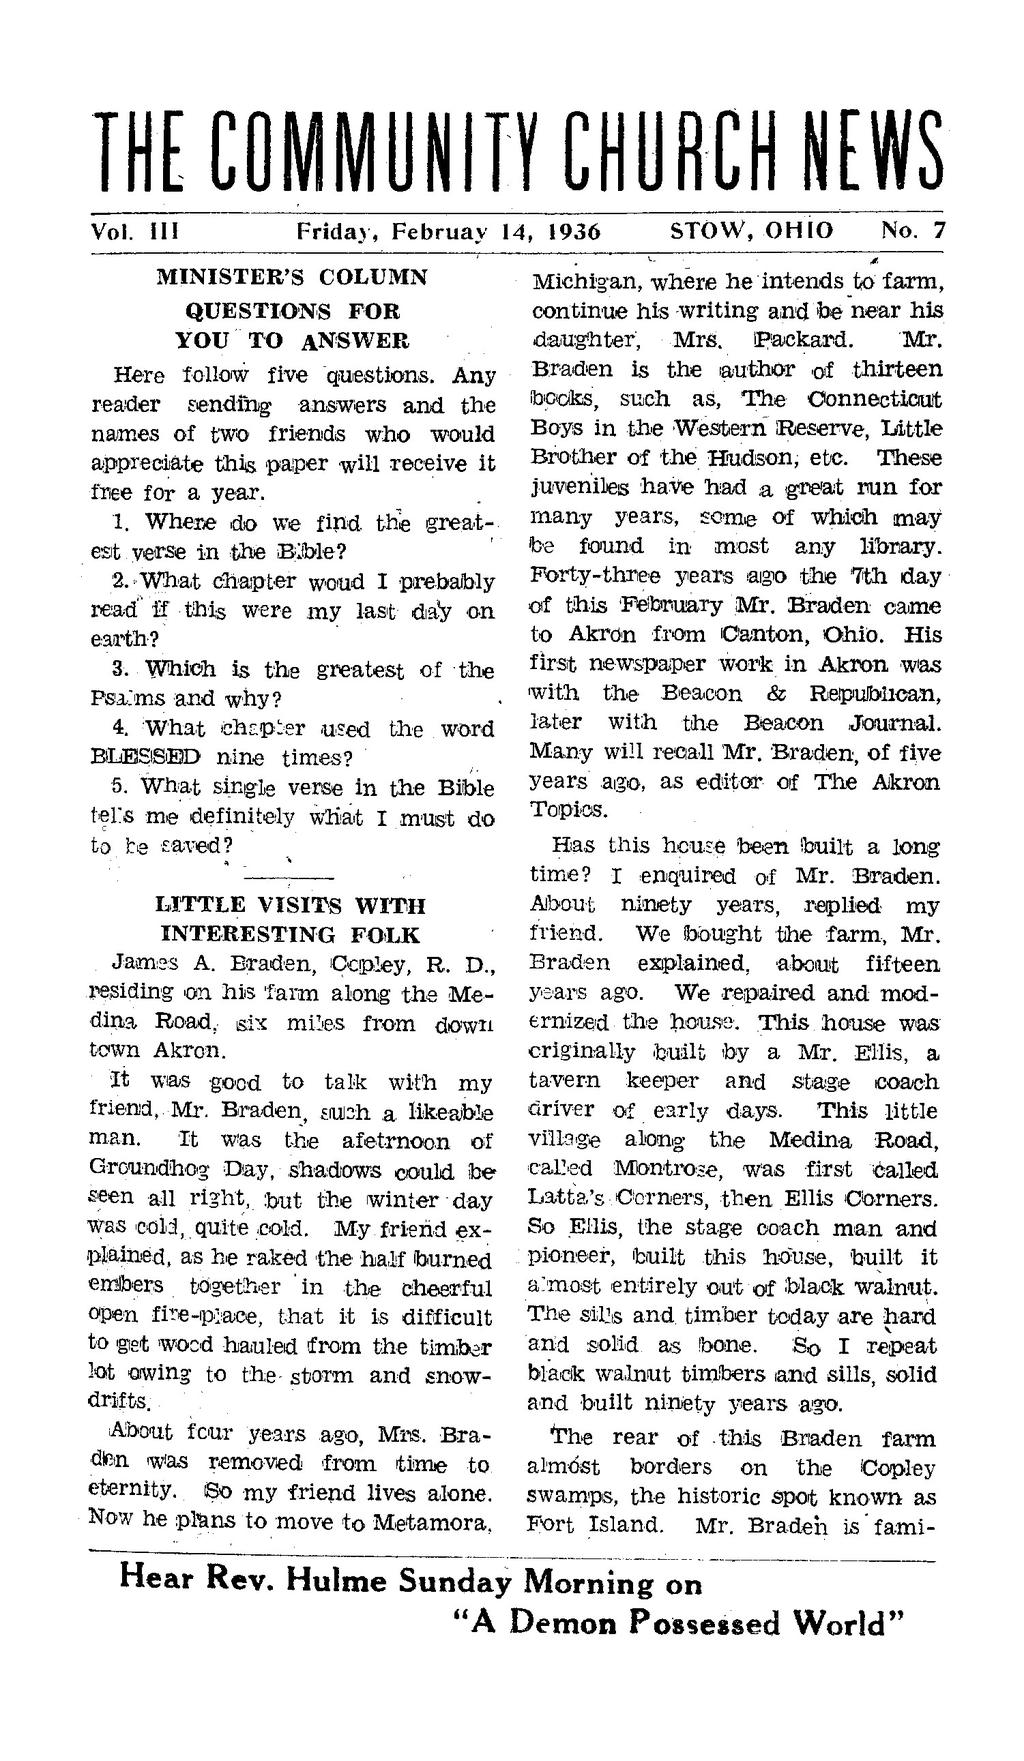 THE COMMUNITY CHURCH NEWS Vol. Ill Friday, Februay 14, 1936 STOW, OHIO No. 7 MINISTER'S COLUMN QUESTIONS FOR YOU TO ANSWER Here follow five questions.